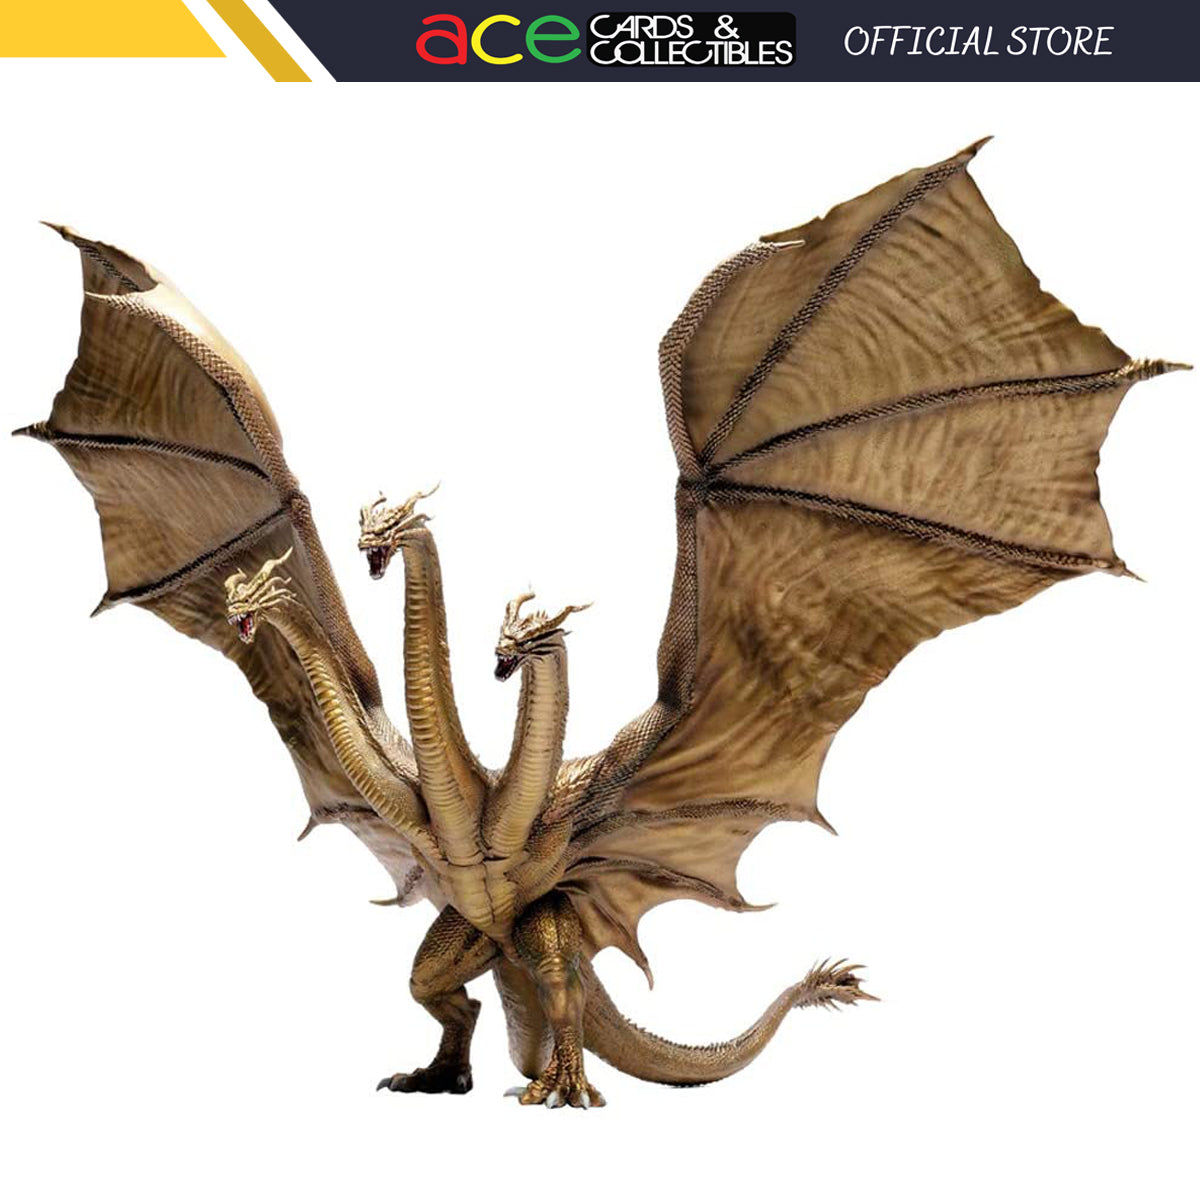 Godzilla: King of the Monsters Hyper Solid Series "King Ghidorah"-ART Spirits-Ace Cards & Collectibles